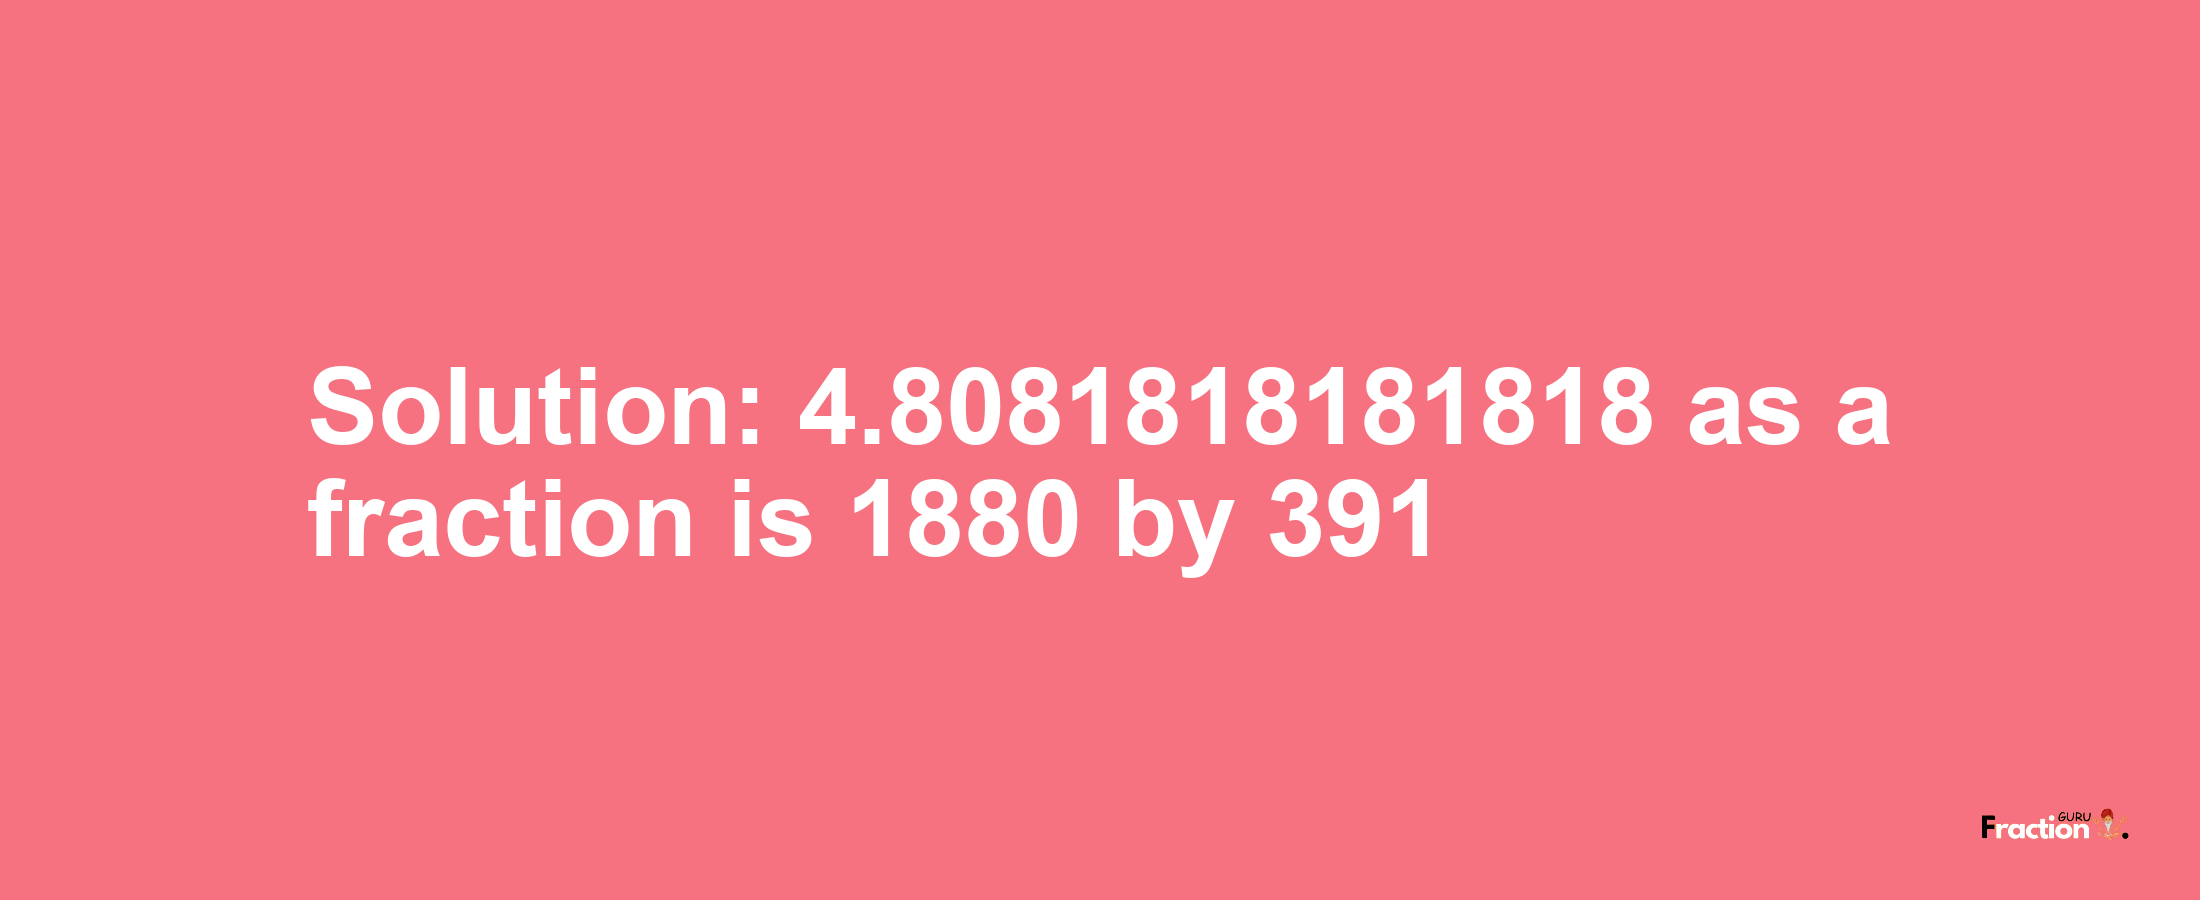 Solution:4.8081818181818 as a fraction is 1880/391